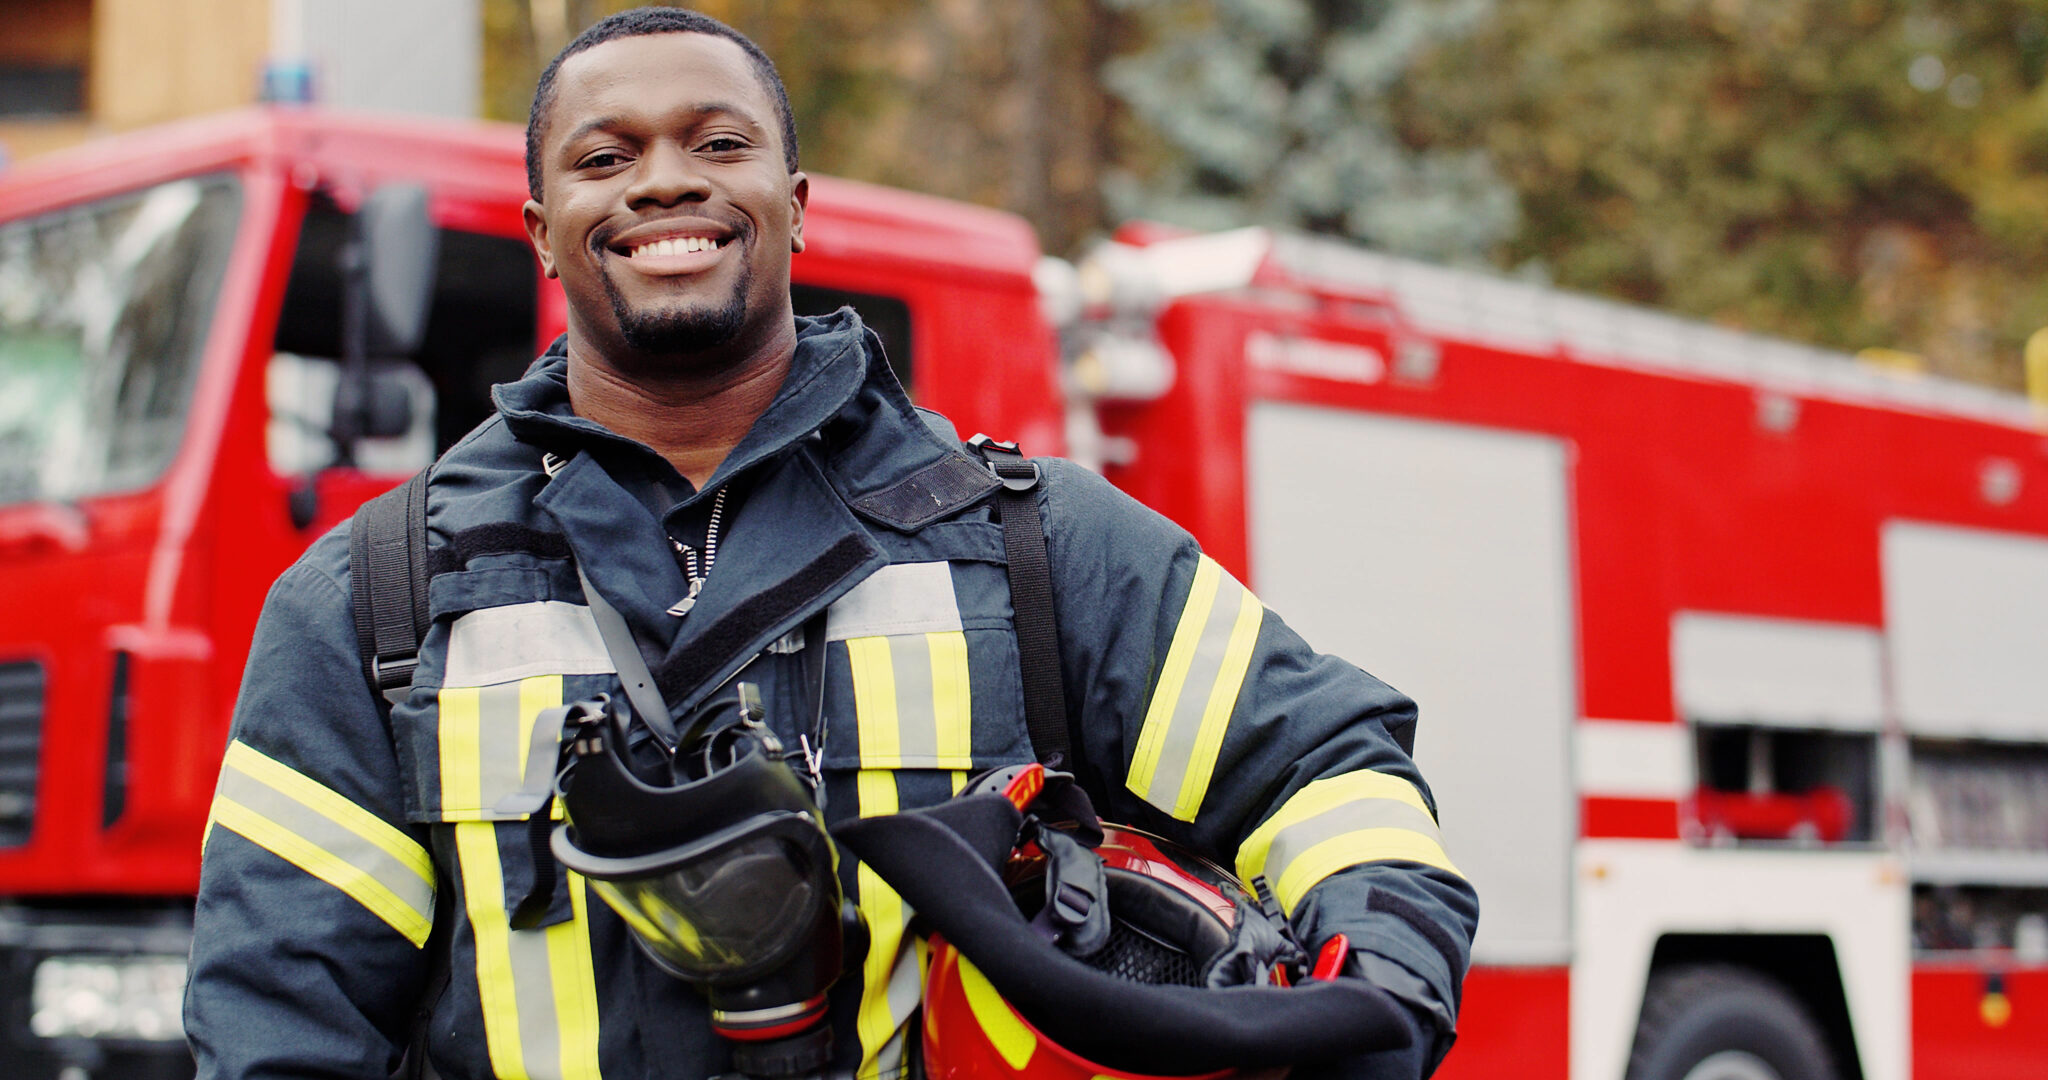 Firefighter happy about his professional discount